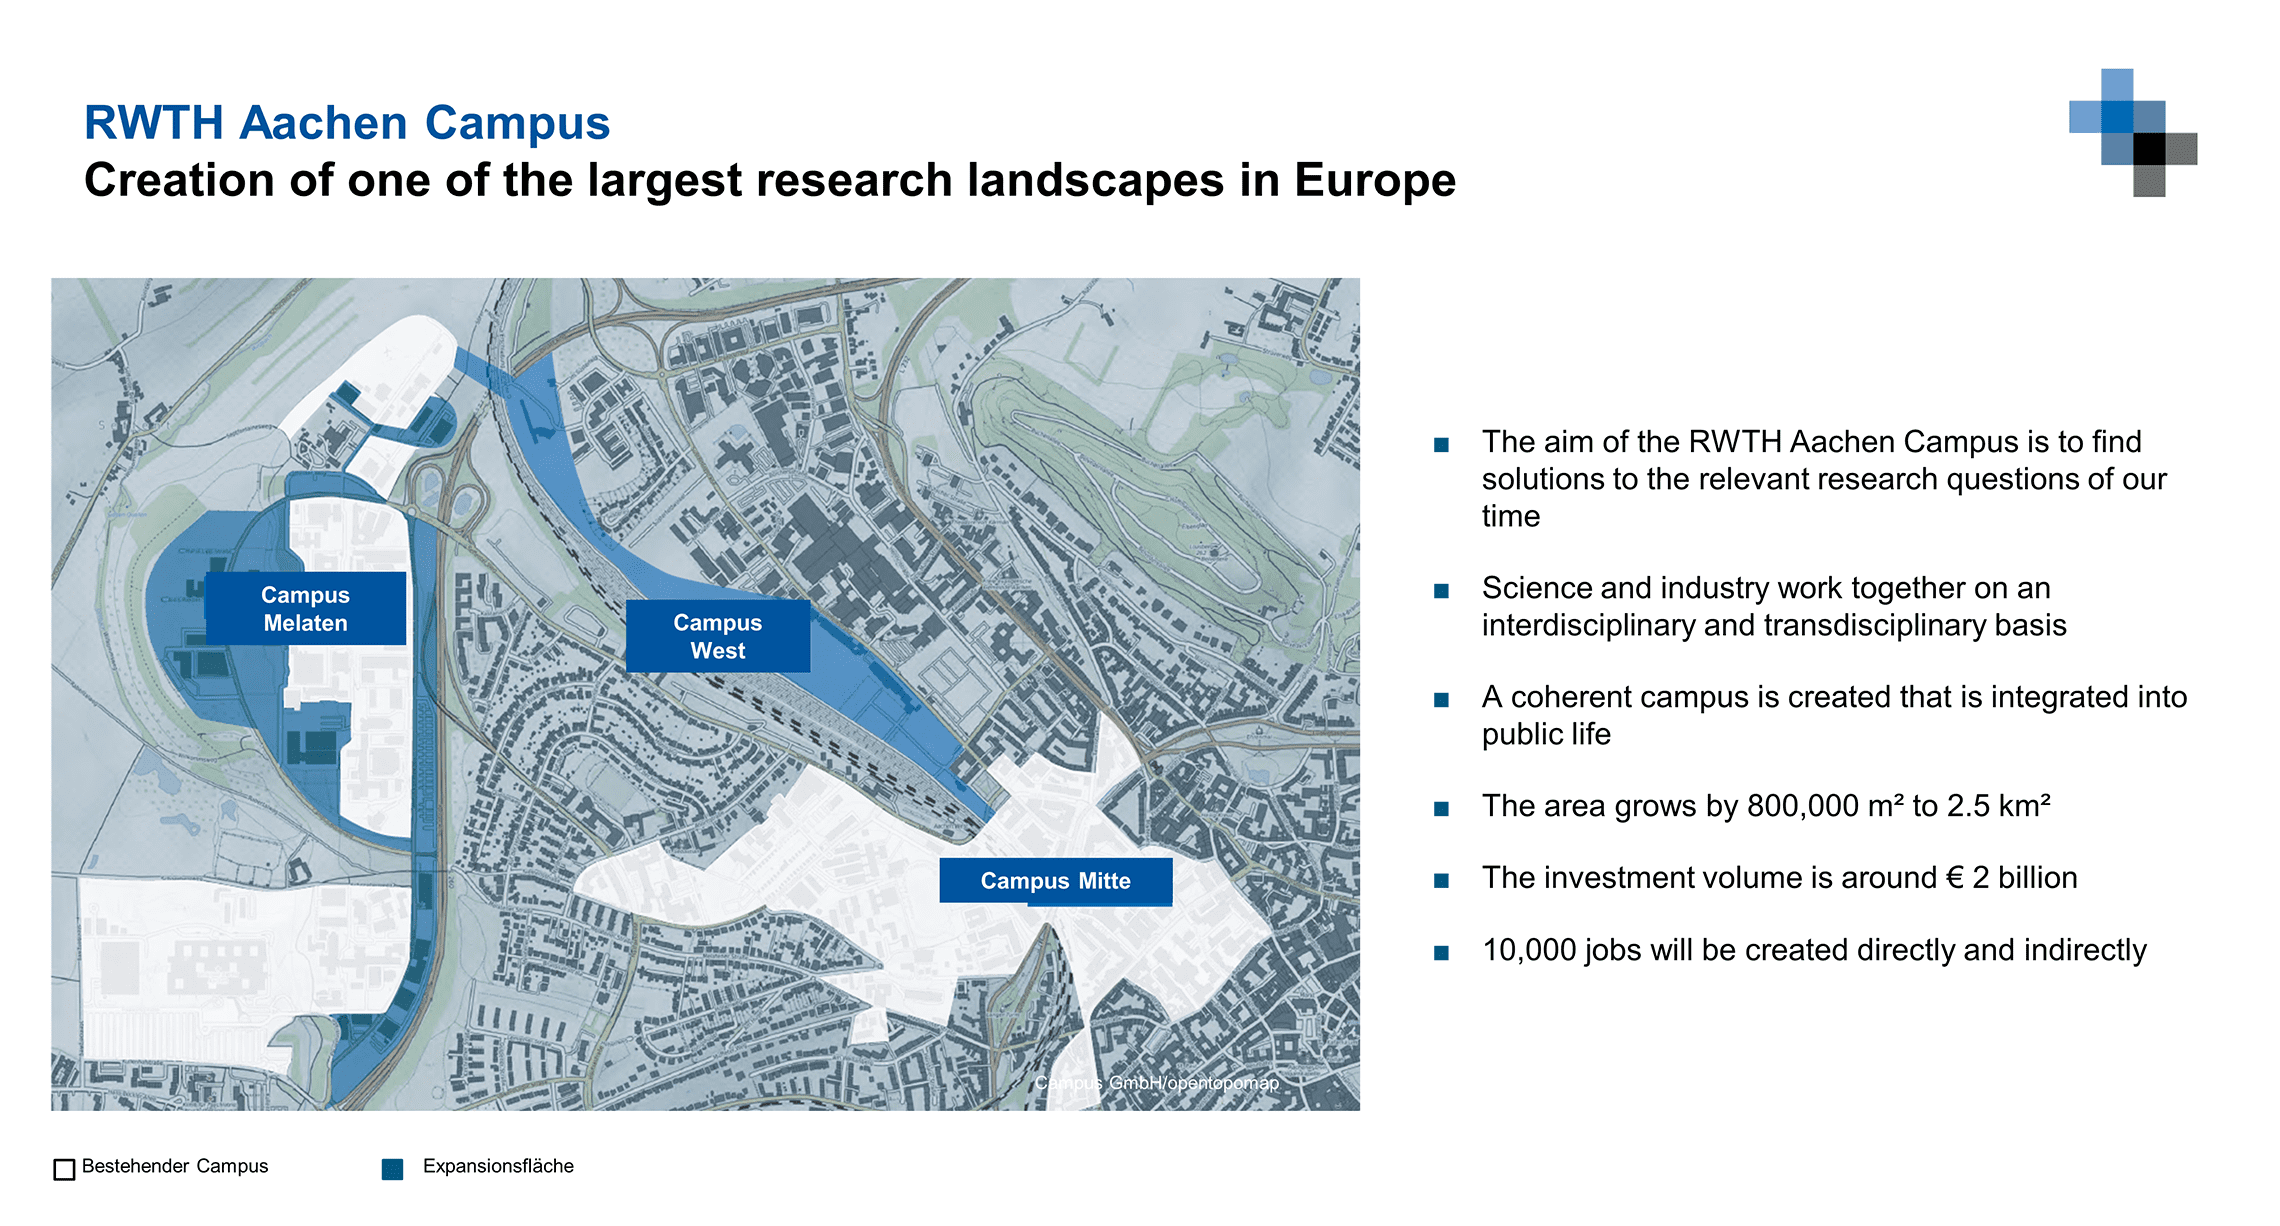 RWTH-Aachen-Campus-Creation-of-one-of-the-largest-research-landscapes-in-Europe First GPMC Annual Meeting 